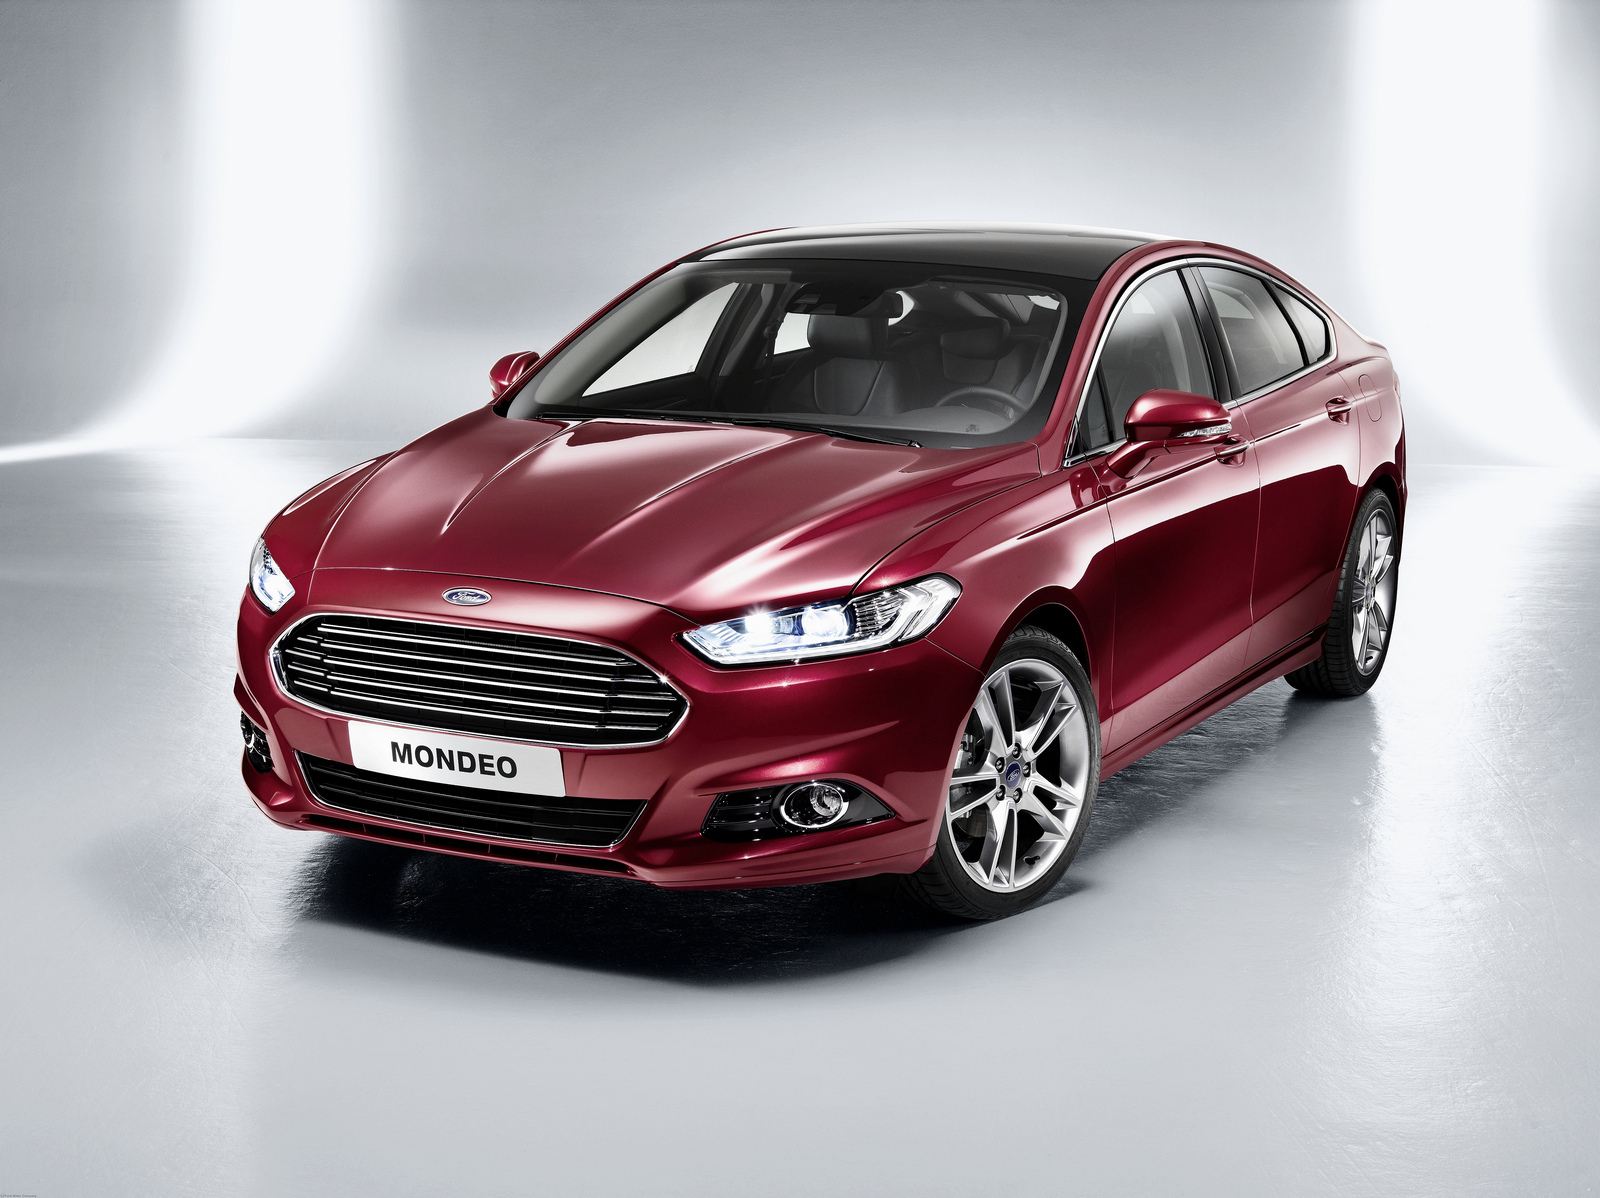 new ford mondeo4 New Ford Mondeo 2014